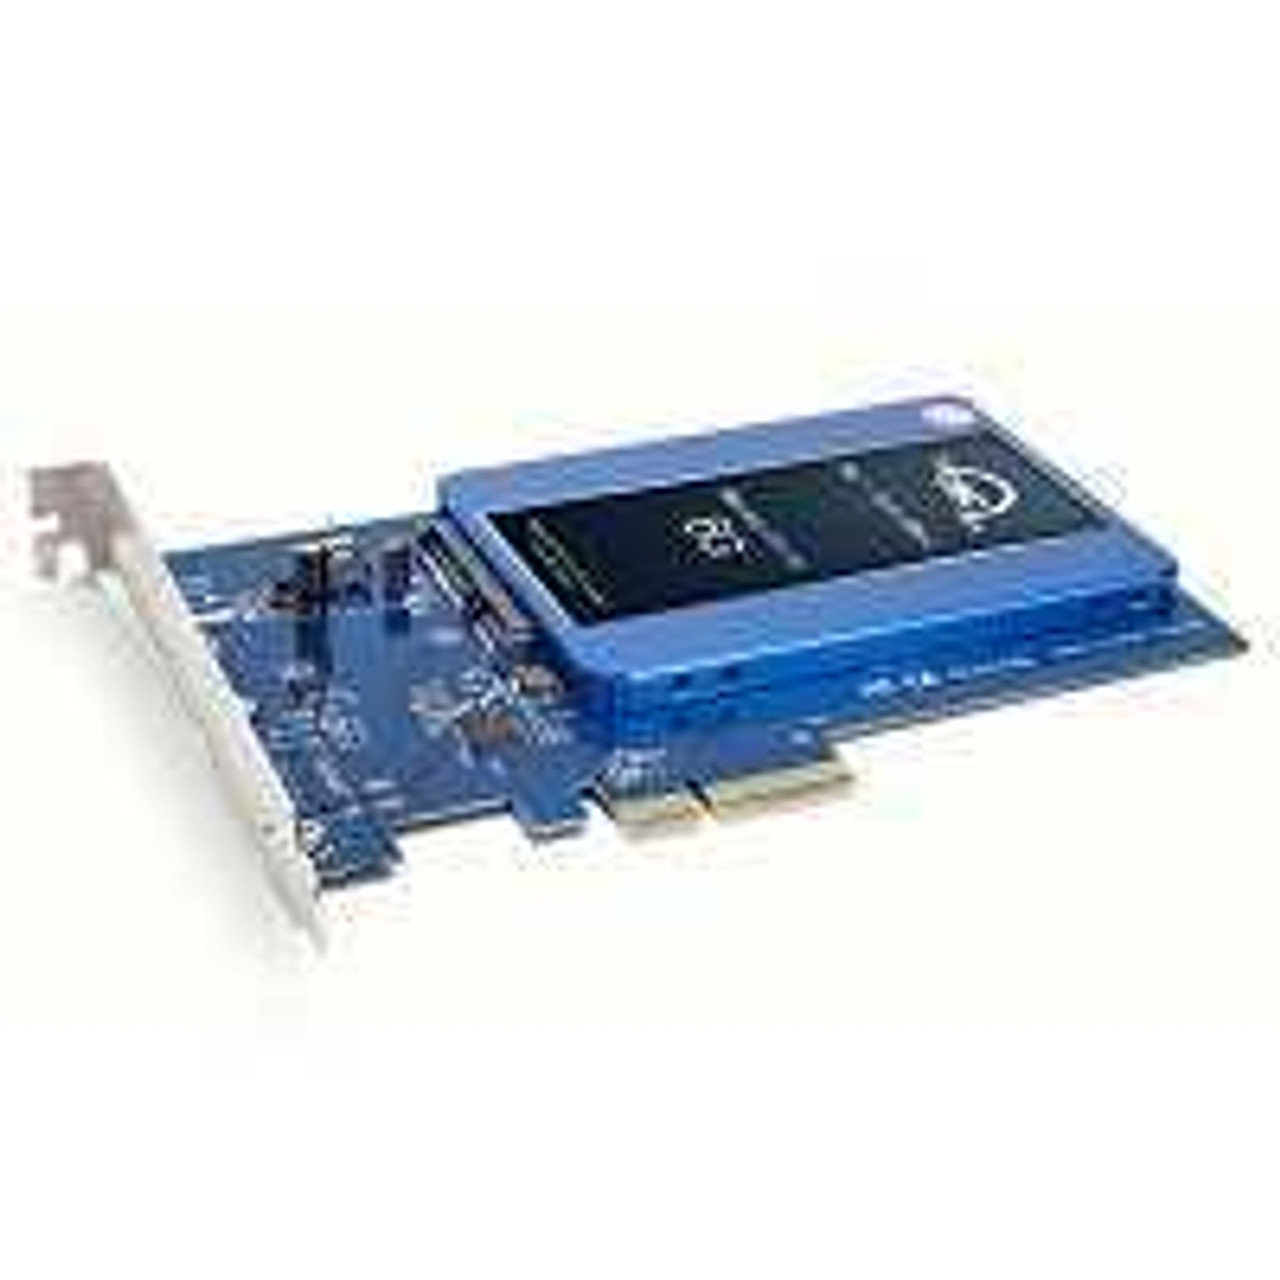 PCIe cards with SSD